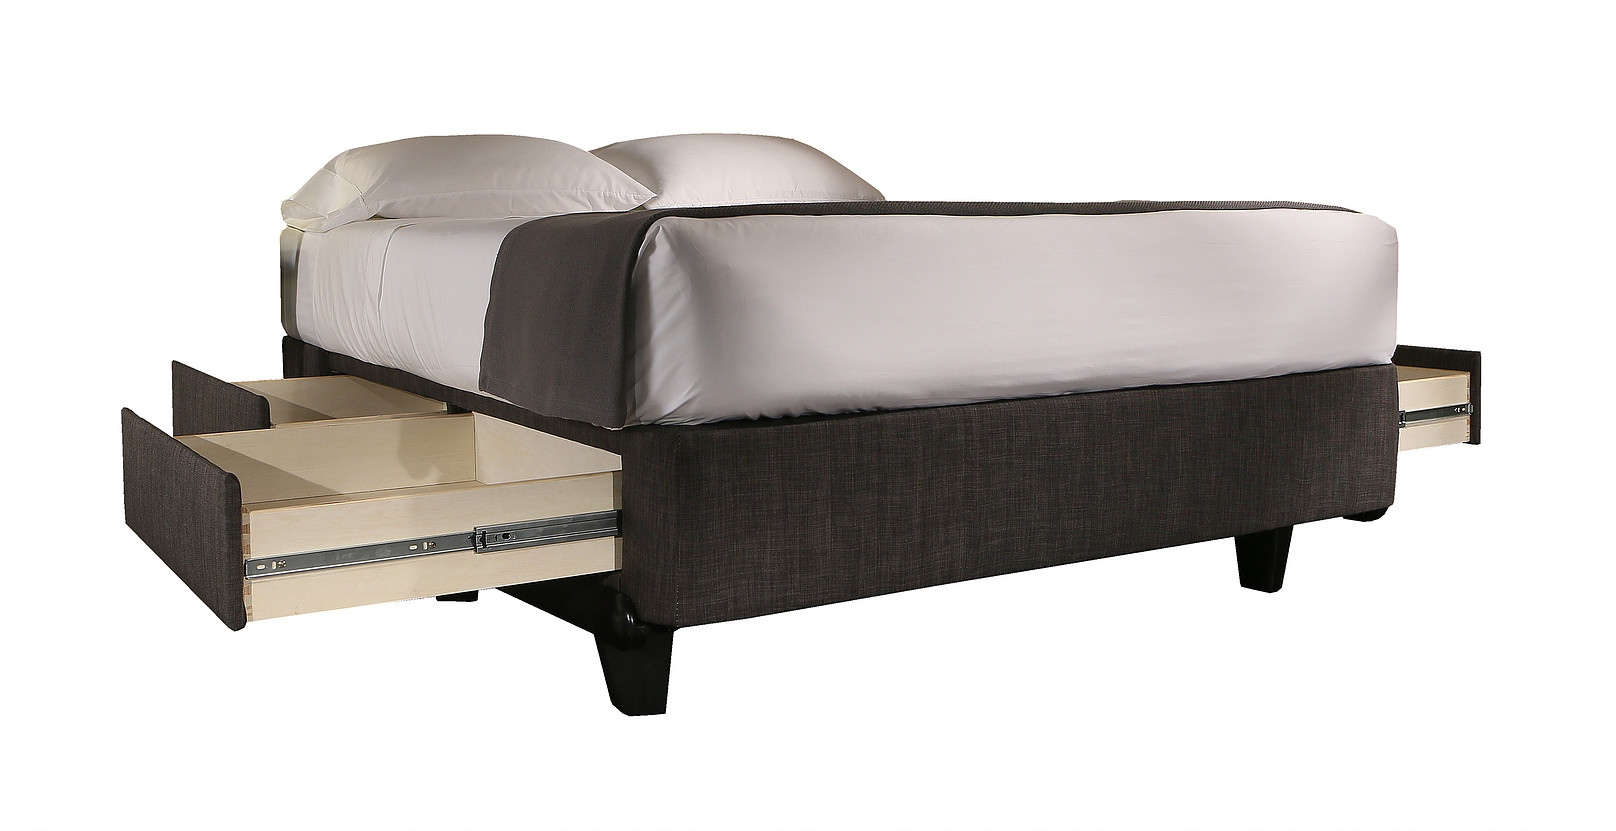 Sto A Way Storage Foundation, Stow Away Bed Frame